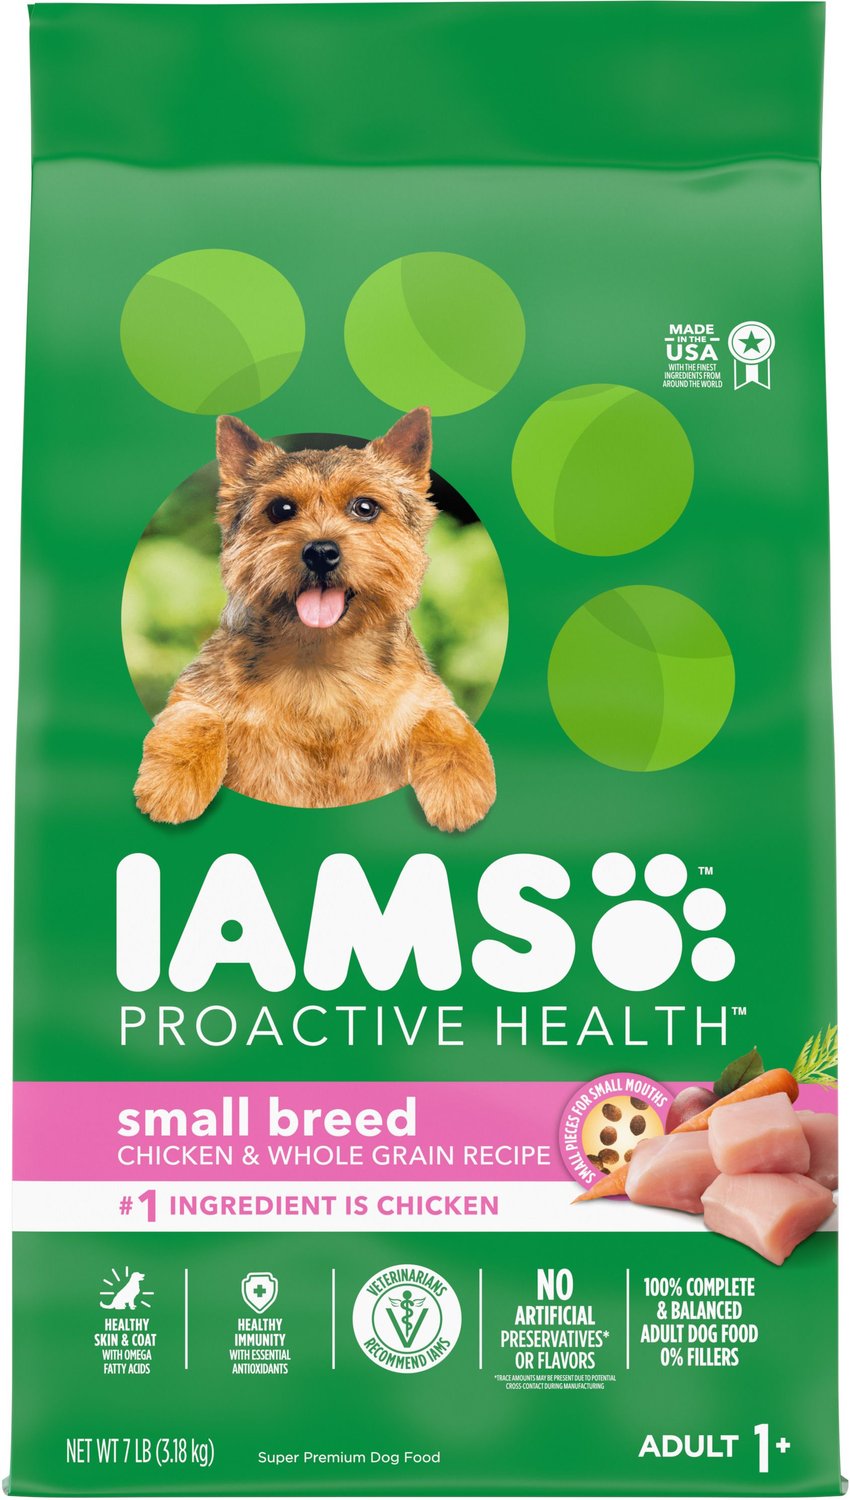 healthiest dog food for small dogs